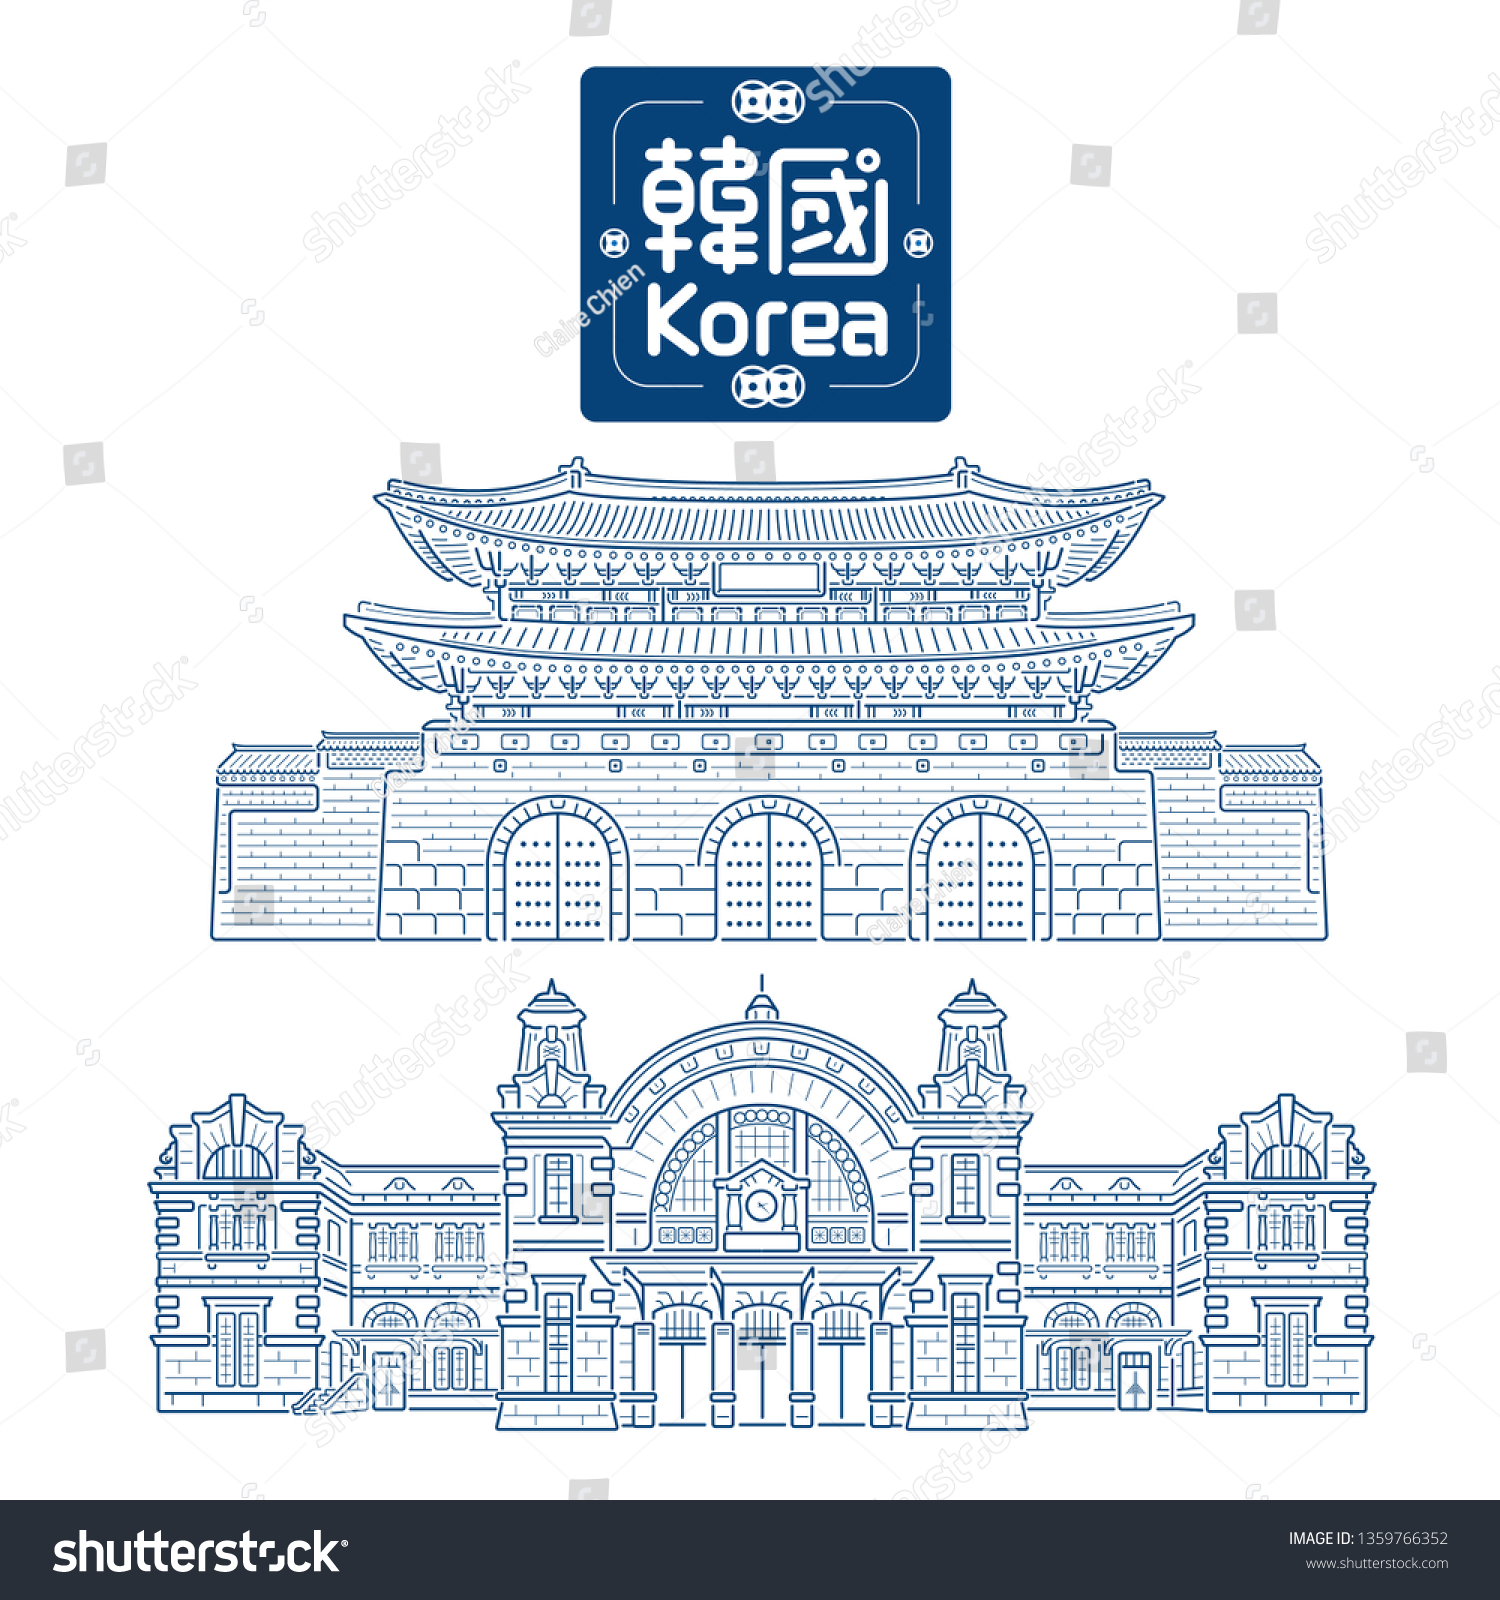 stock-vector-building-line-art-vector-illustration-design-seoul-south-korea-chinese-text-means-seoul-south-1359766352